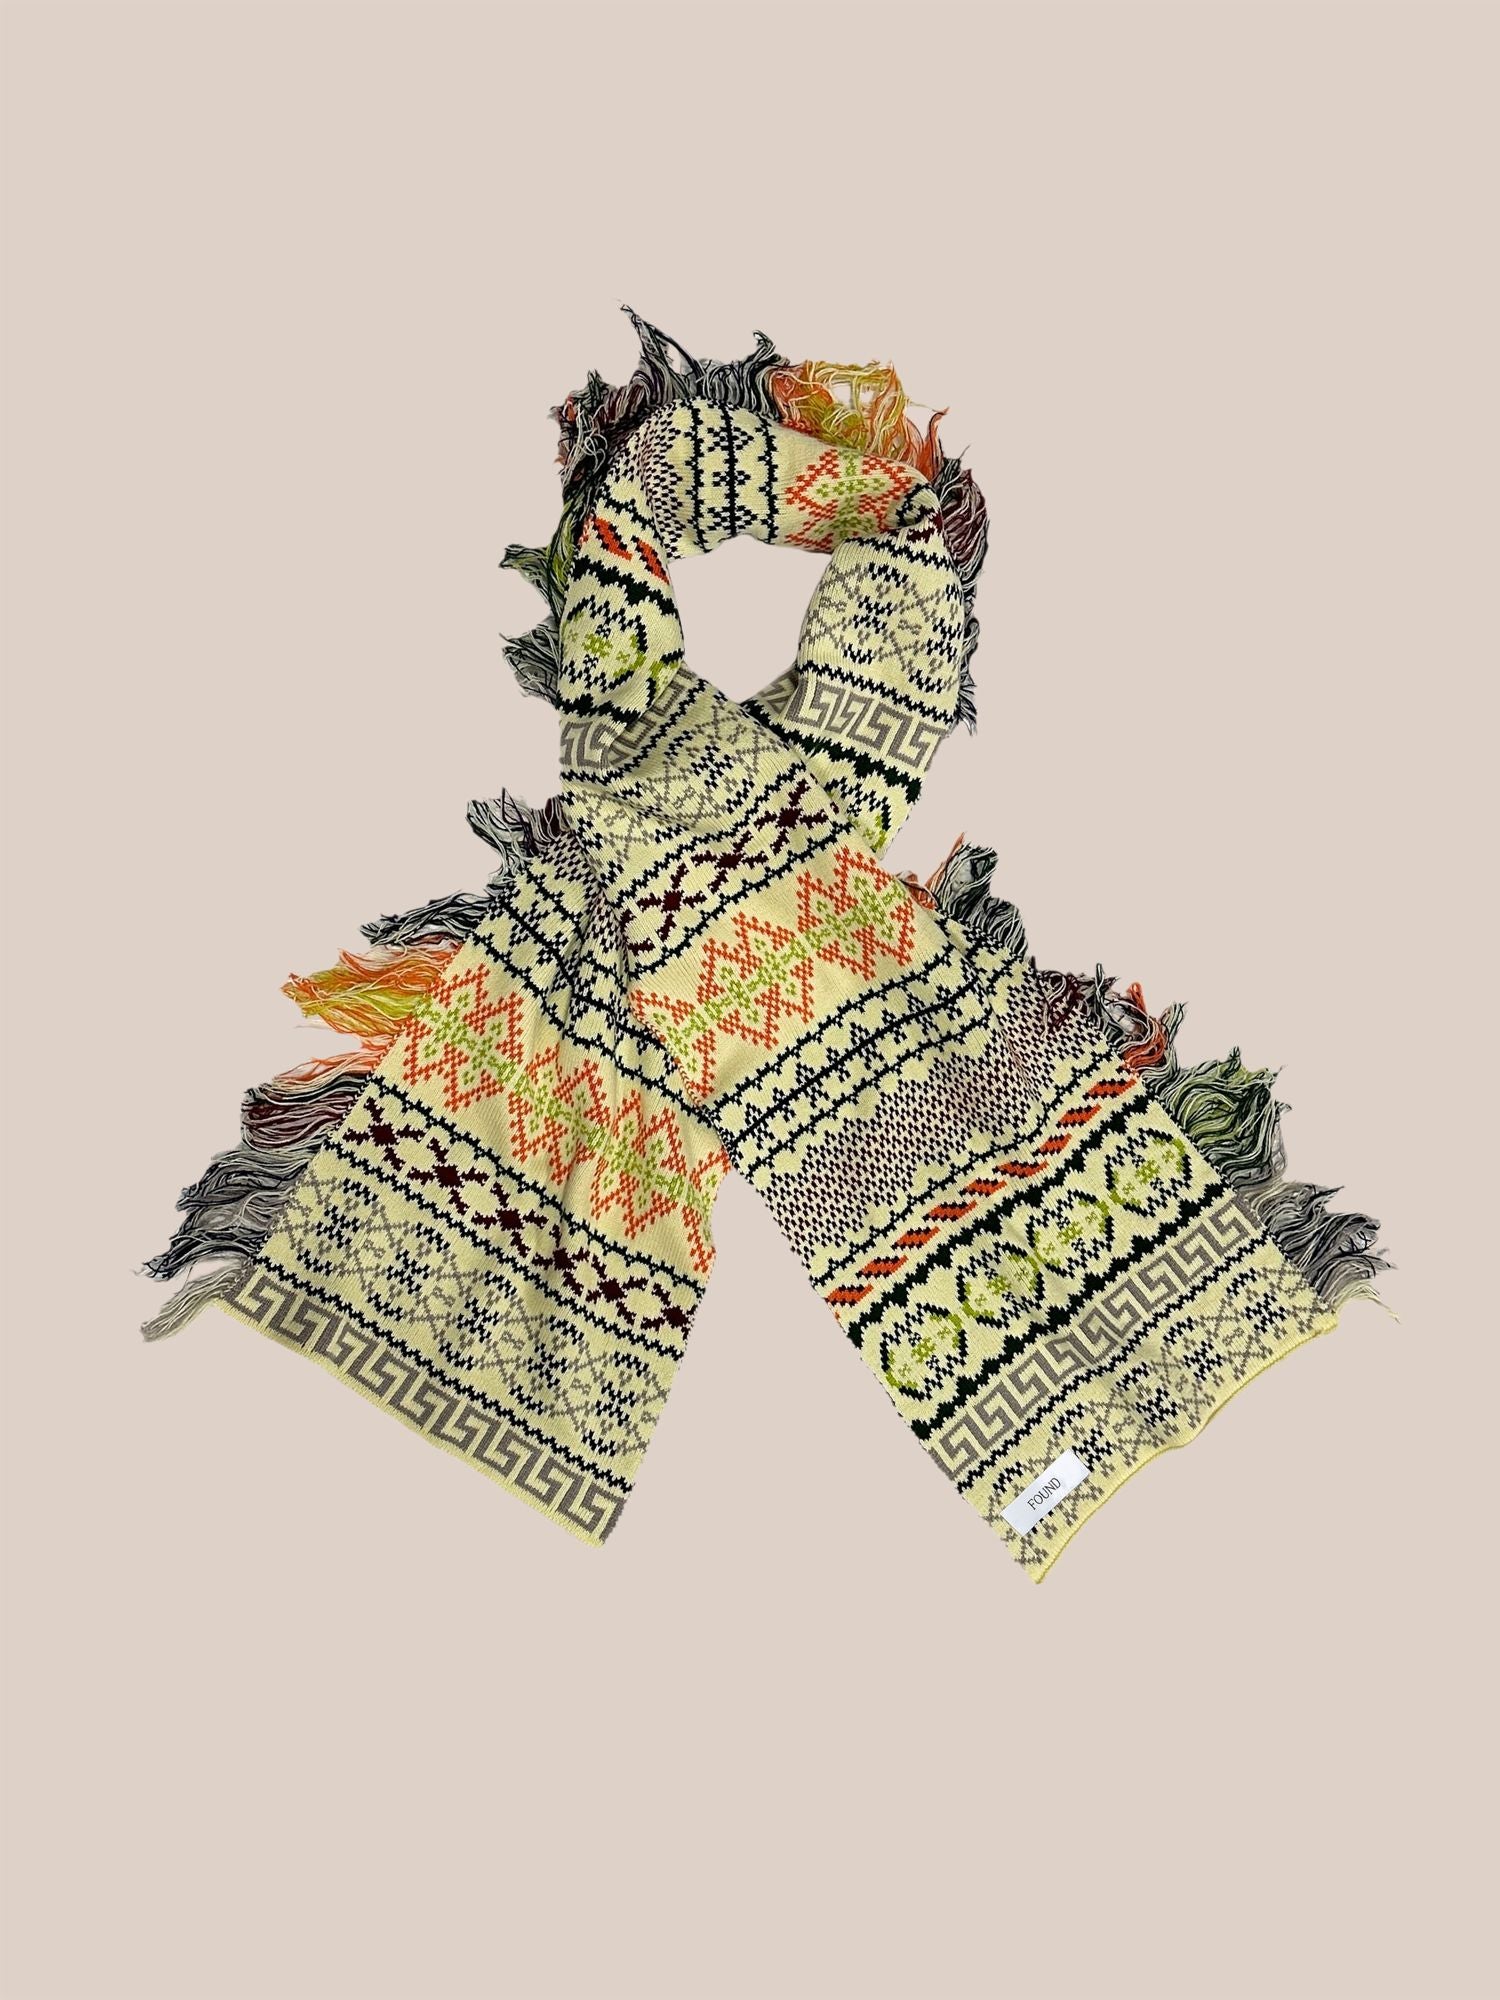 A colorful, patterned Isles Scarf from Found with fringed ends, displayed on a light pink background.